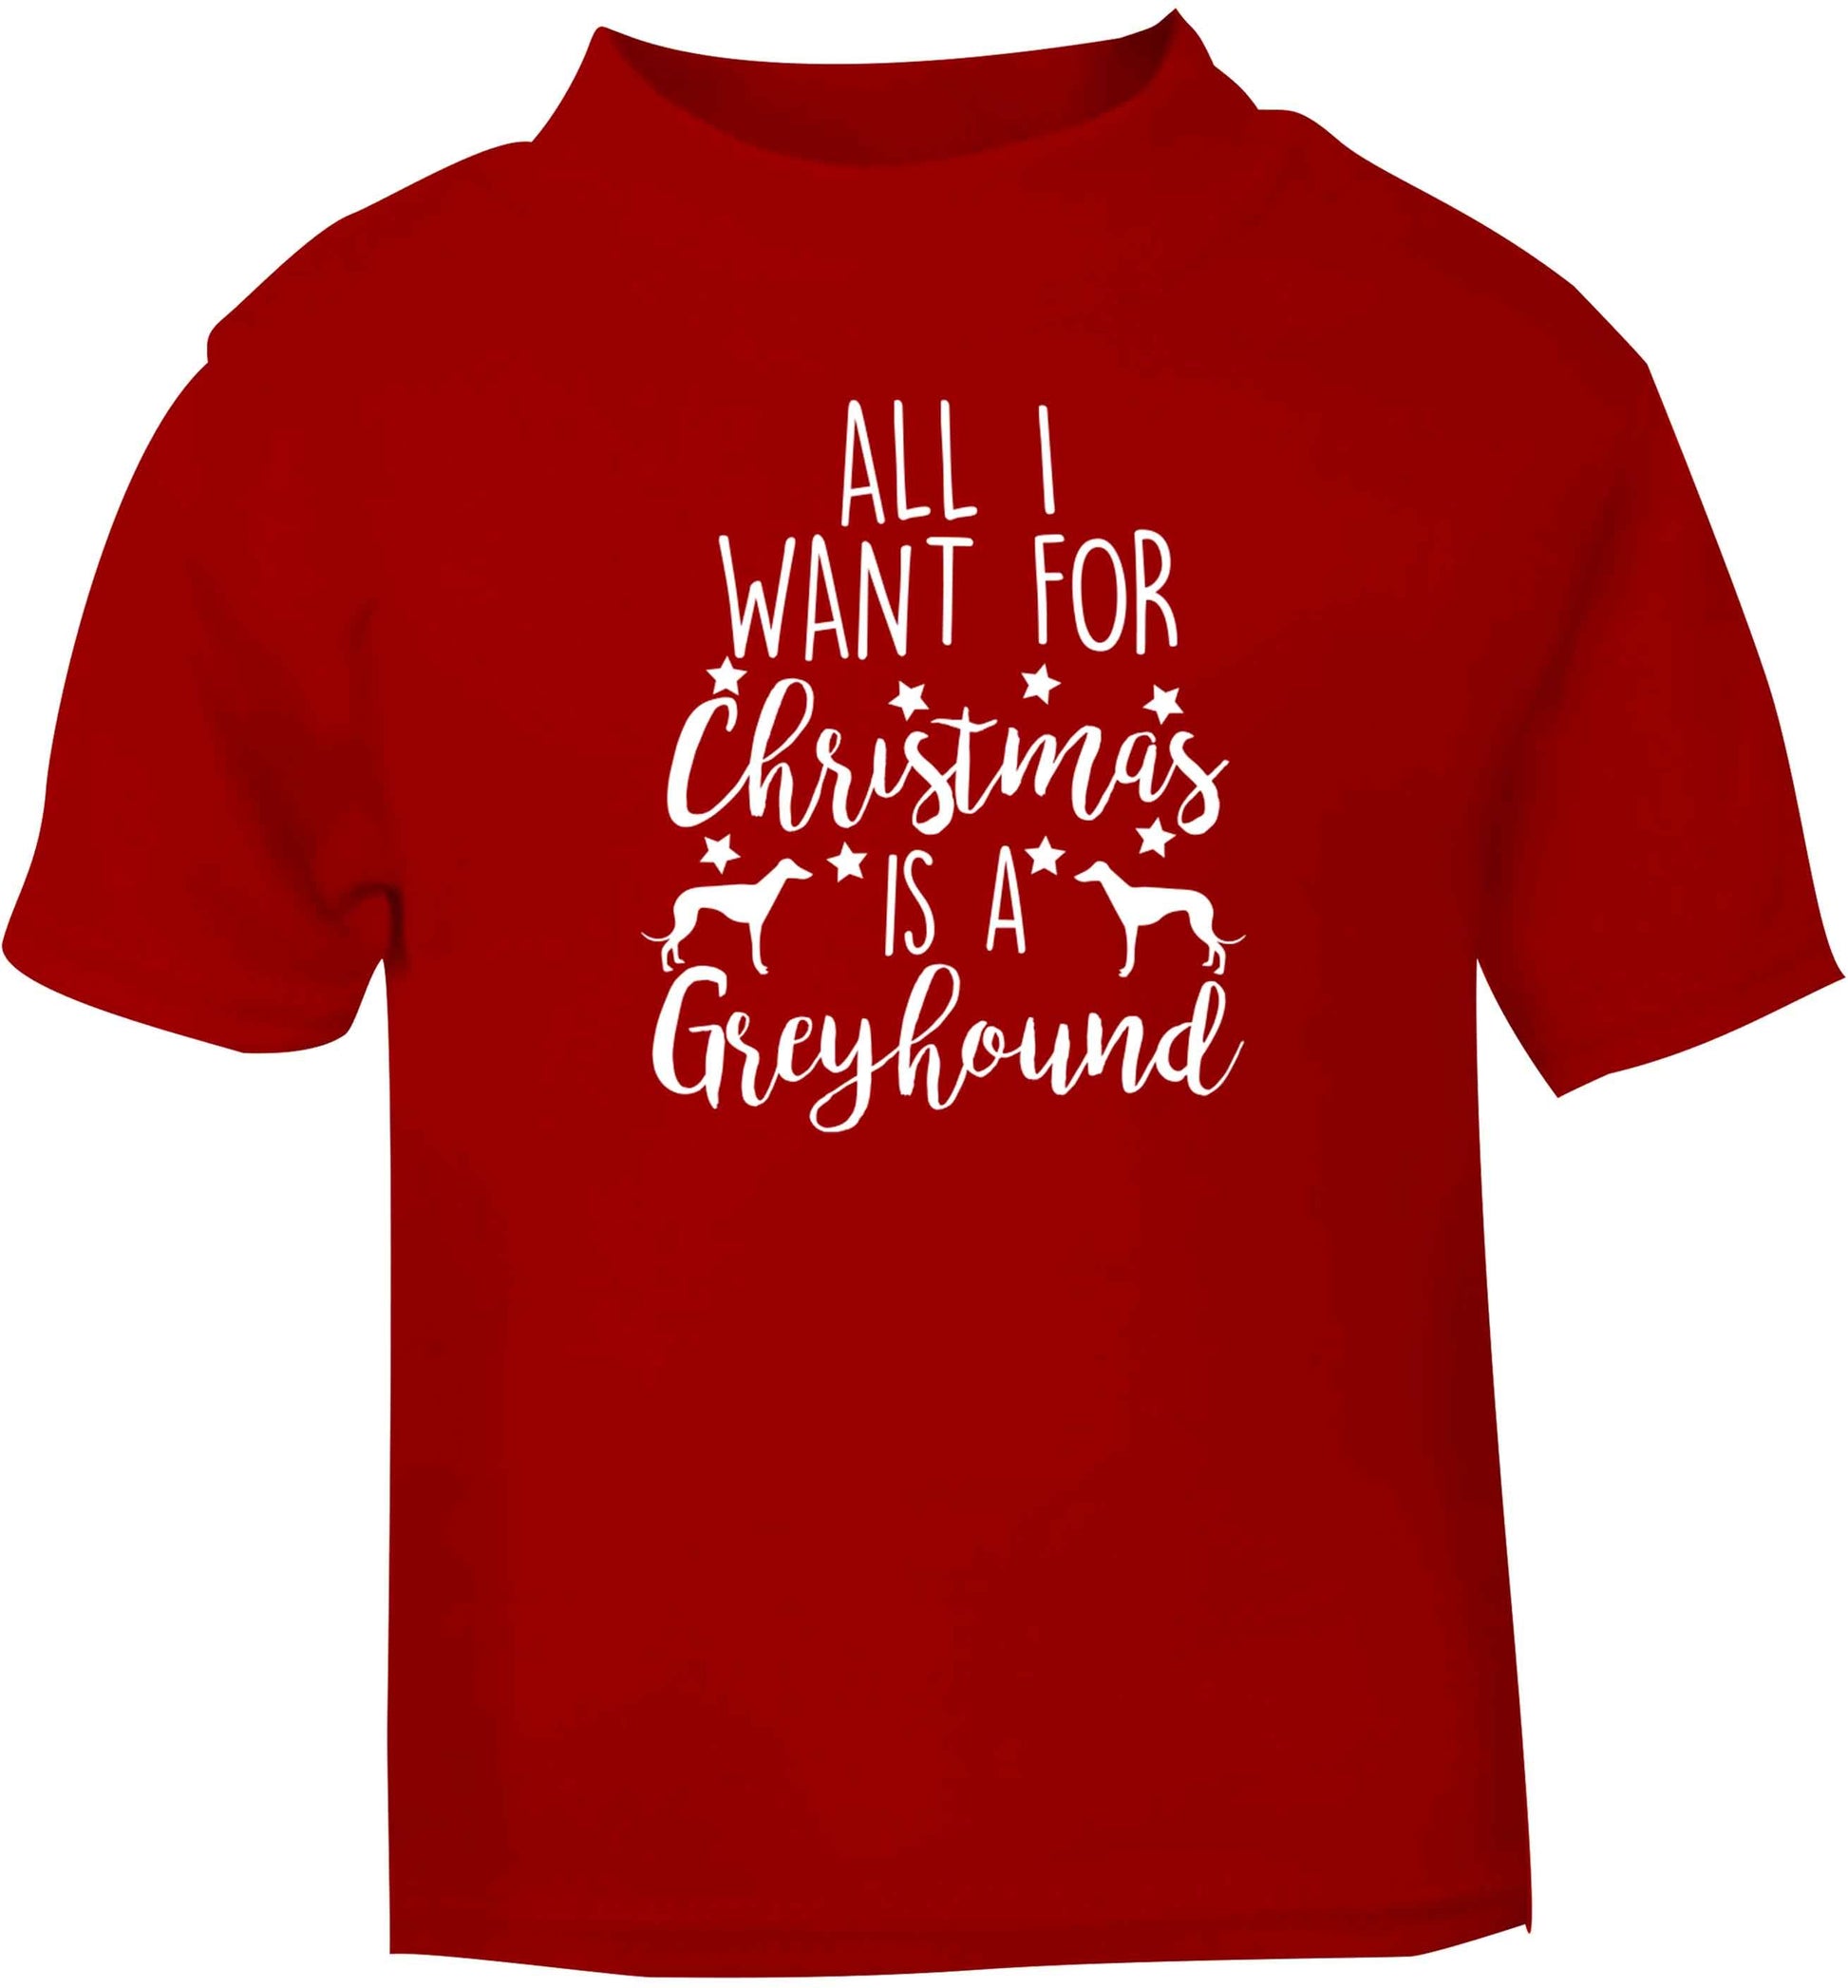 All I want for Christmas is a greyhound red baby toddler Tshirt 2 Years